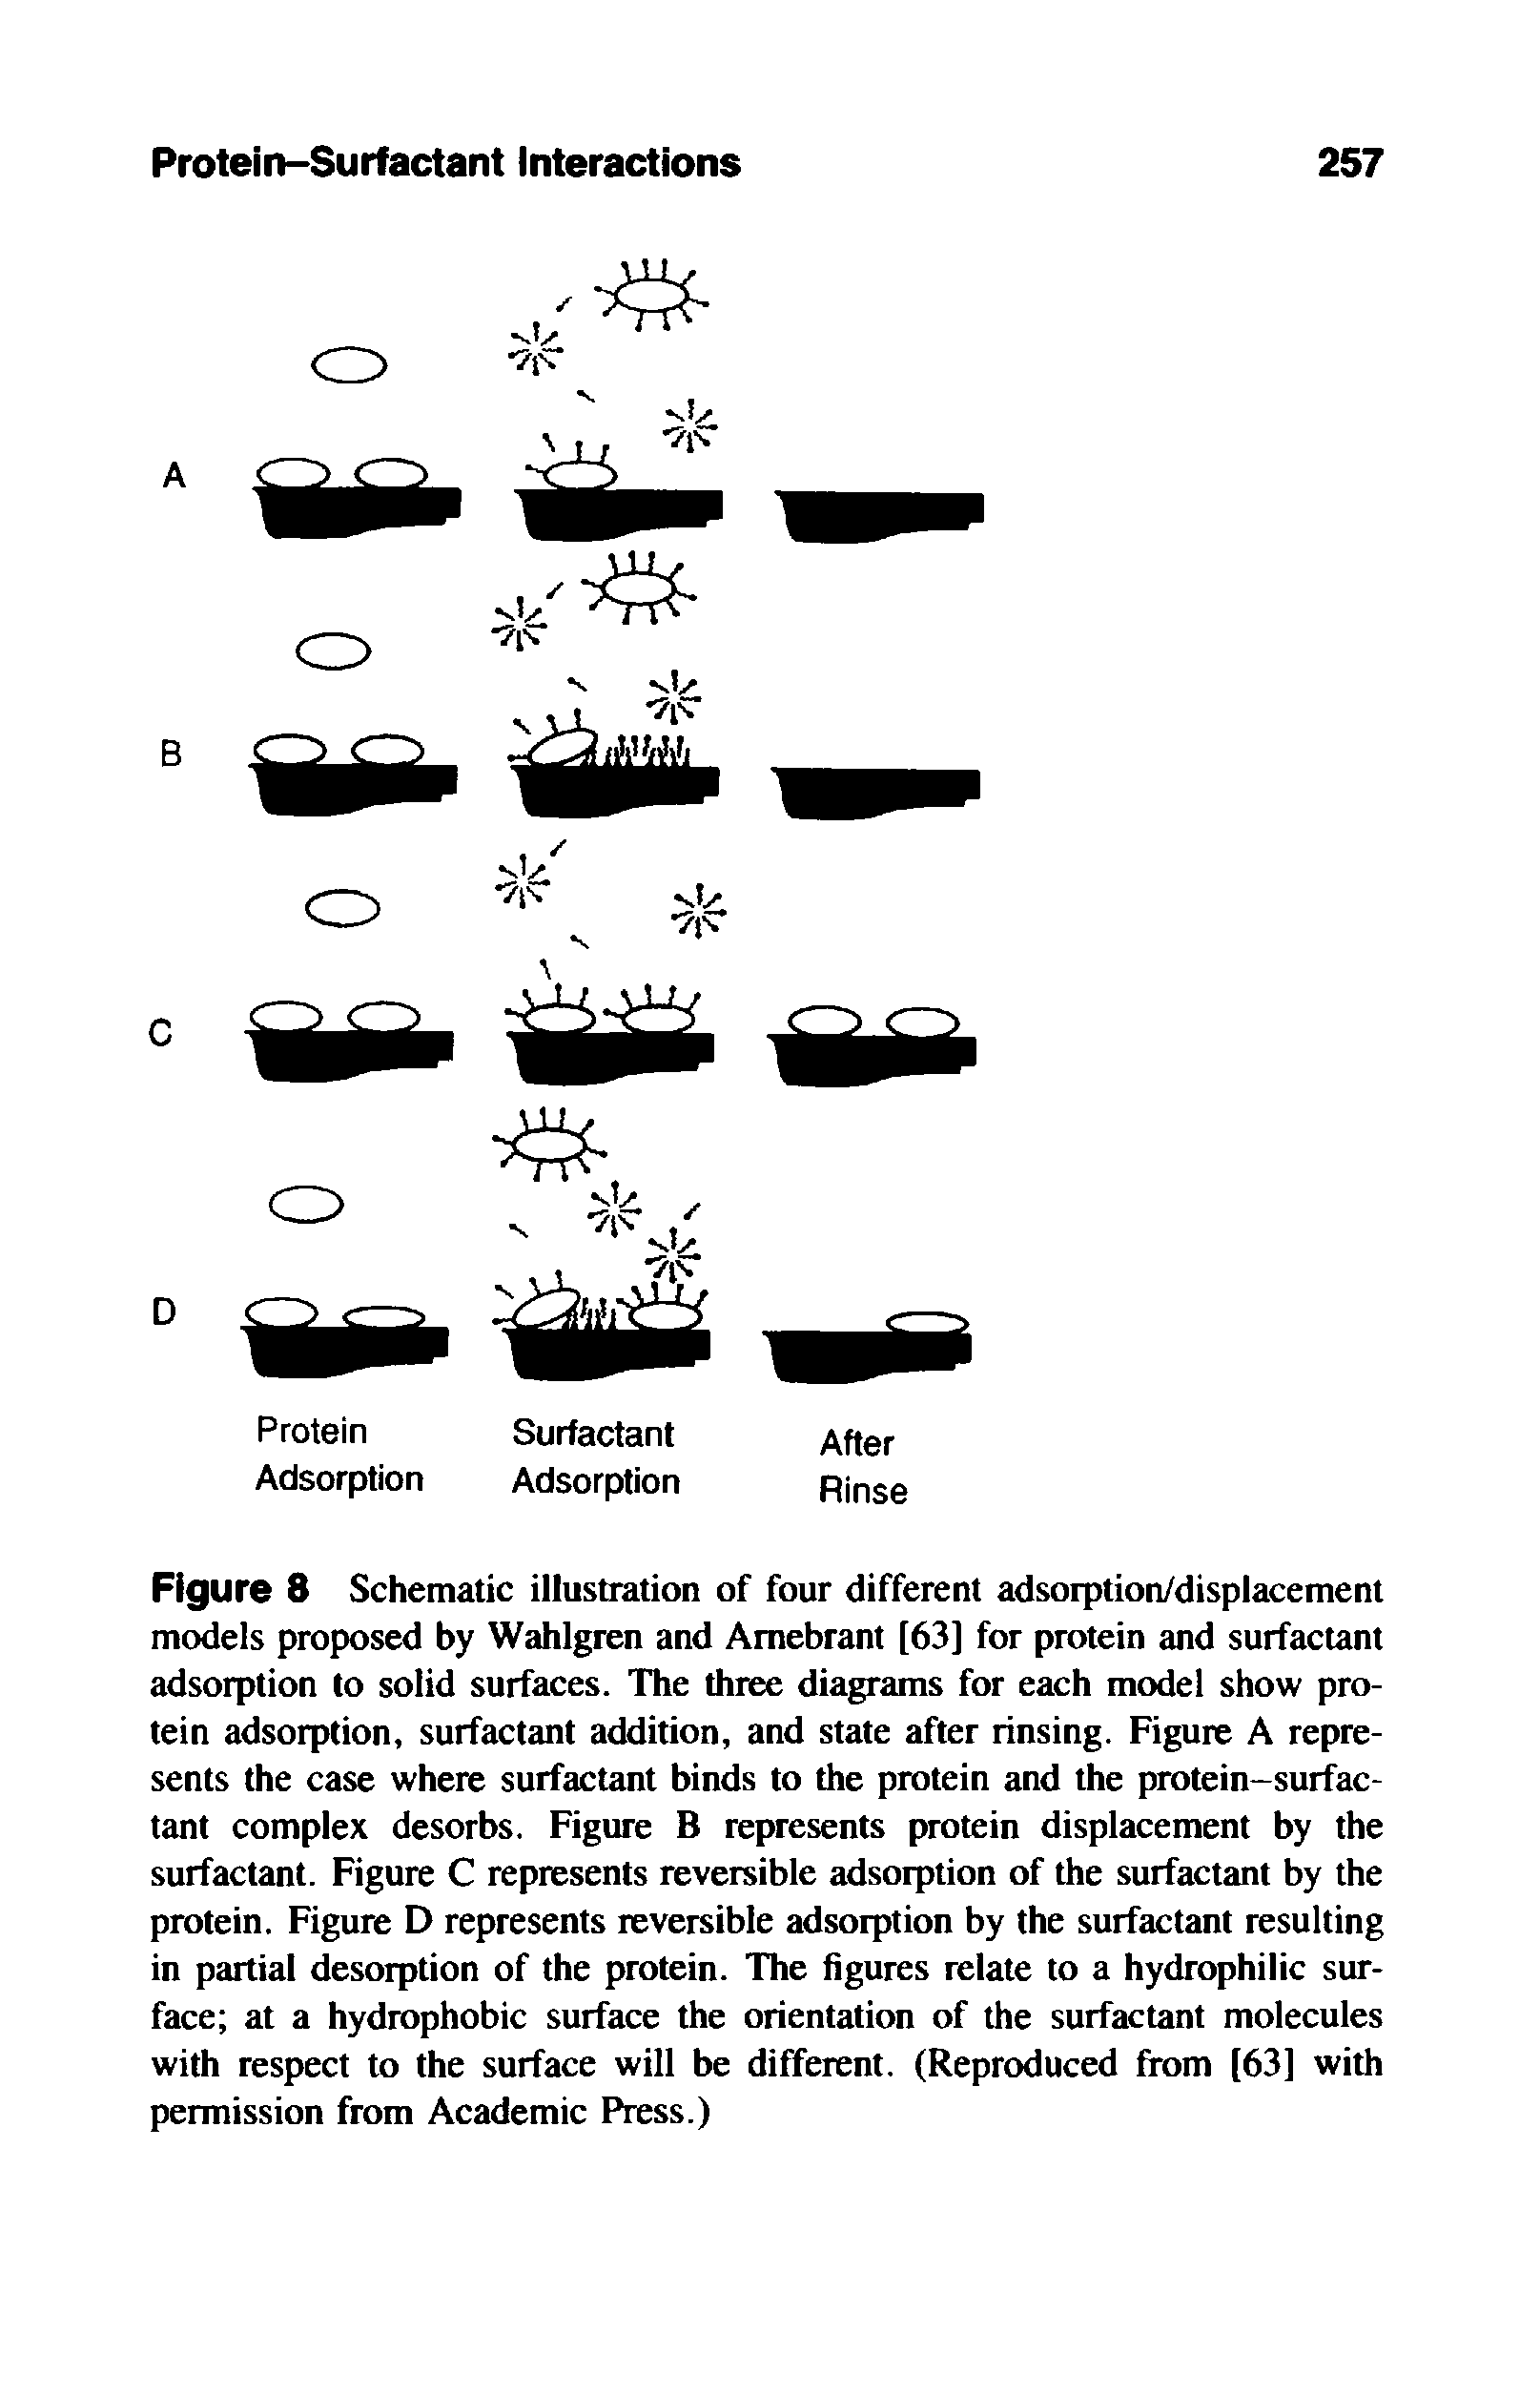 Figure 8 Schematic illustration of four different adsorption/displacement models proposed by Wahlgren and Amebrant [63] for protein and surfactant adsorption to solid surfaces. The three diagrams for each model show protein adsorption, surfactant addition, and state after rinsing. Figure A represents the case where surfactant binds to the protein and the protein-surfactant complex desorbs. Figure B represents protein displacement by the surfactant. Figure C represents reversible adsorption of the surfactant by the protein. Figure D represents reversible adsorption by the surfactant resulting in partial desorption of the protein. The figures relate to a hydrophilic surface at a hydrophobic surface the orientation of the surfactant molecules with respect to the surface will be different. (Reproduced from [63] with permission from Academic Press.)...